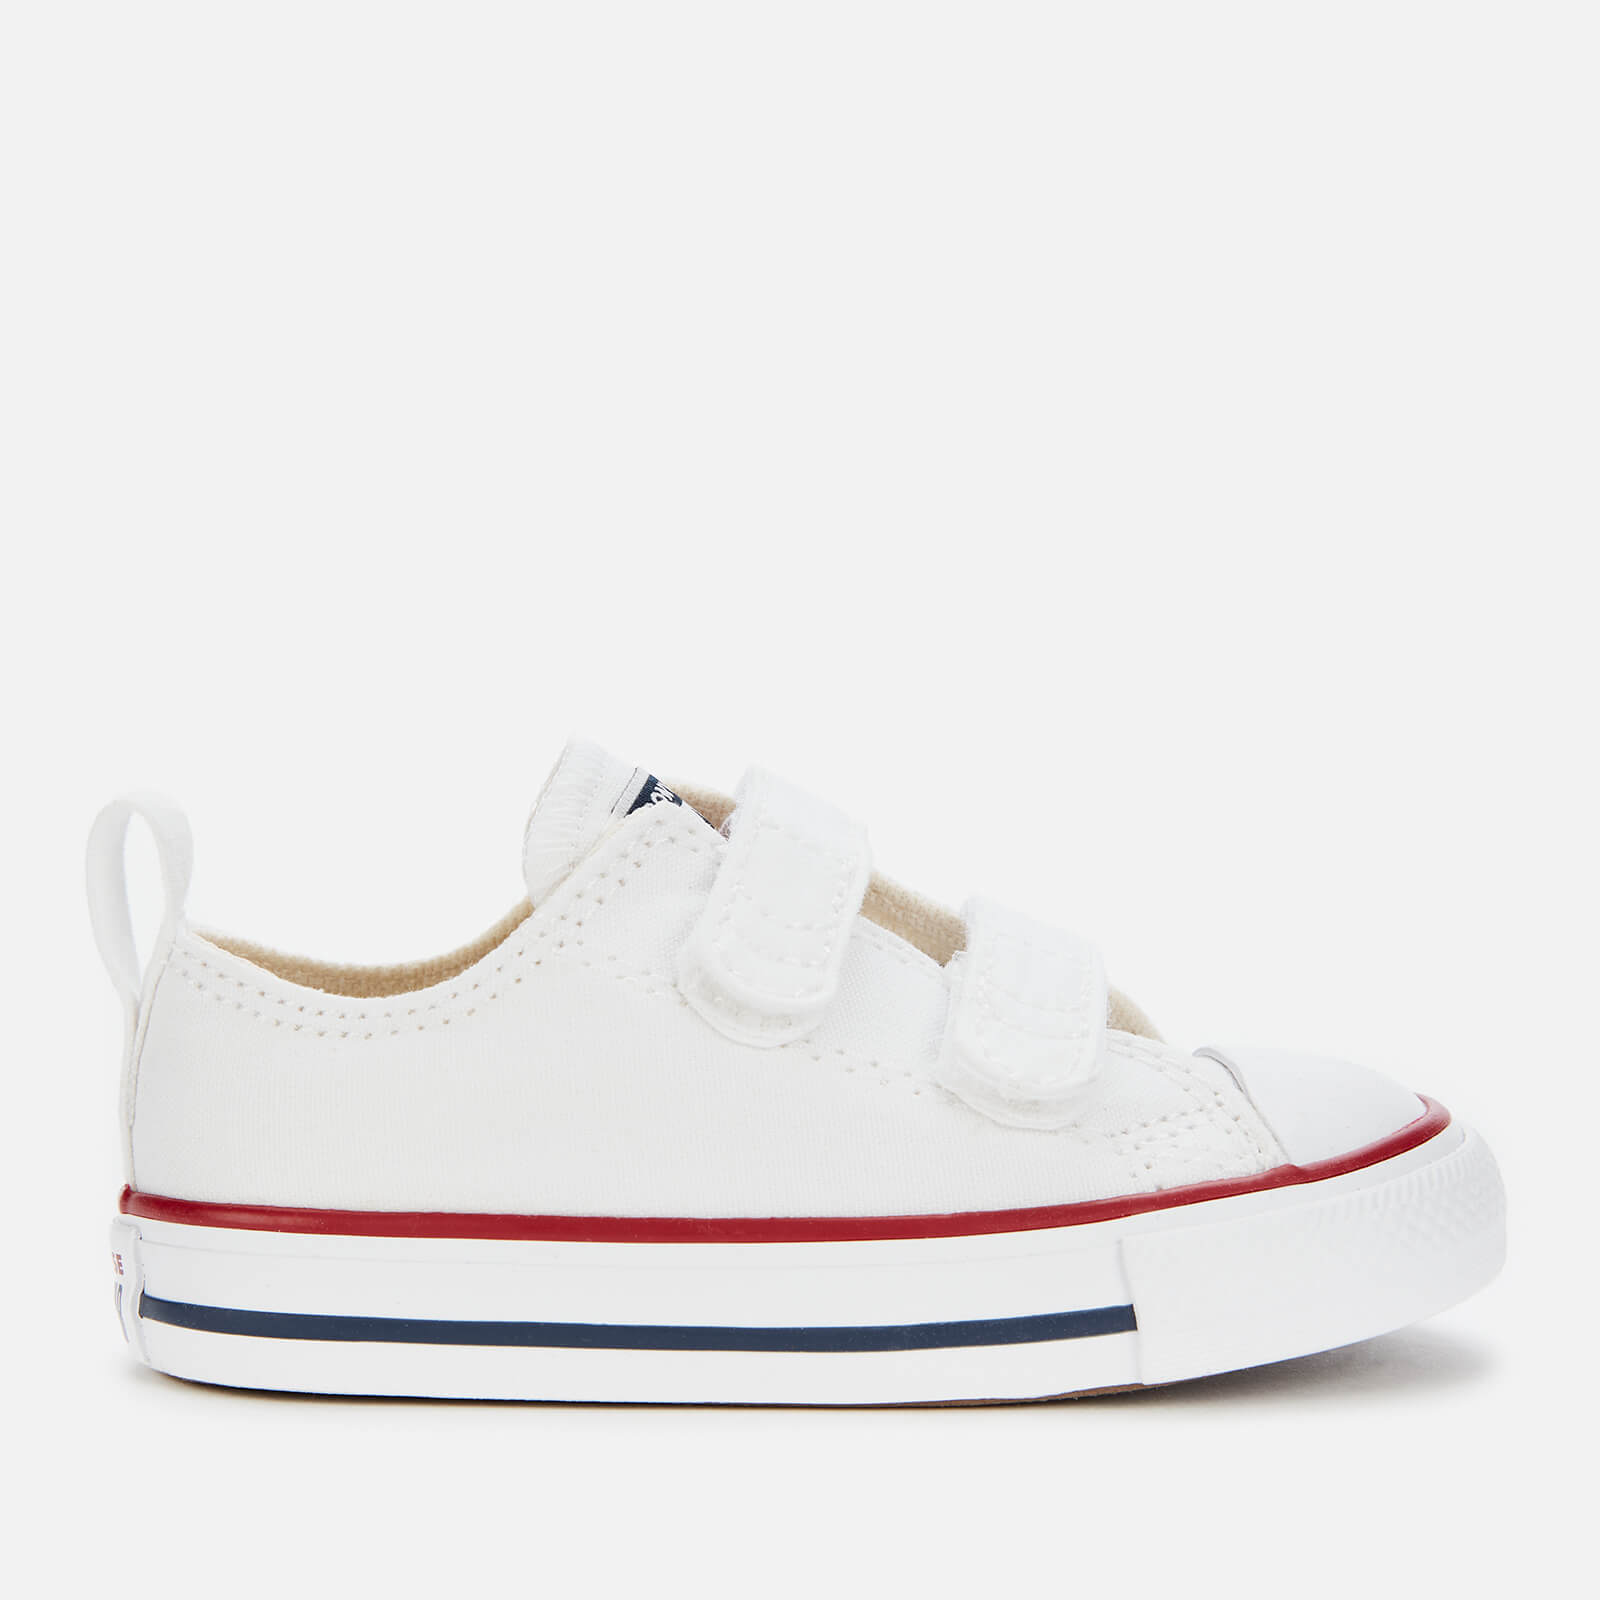 Converse Toddlers' Chuck Taylor All Star Ox Velcro Trainers - White - UK 10 Kids